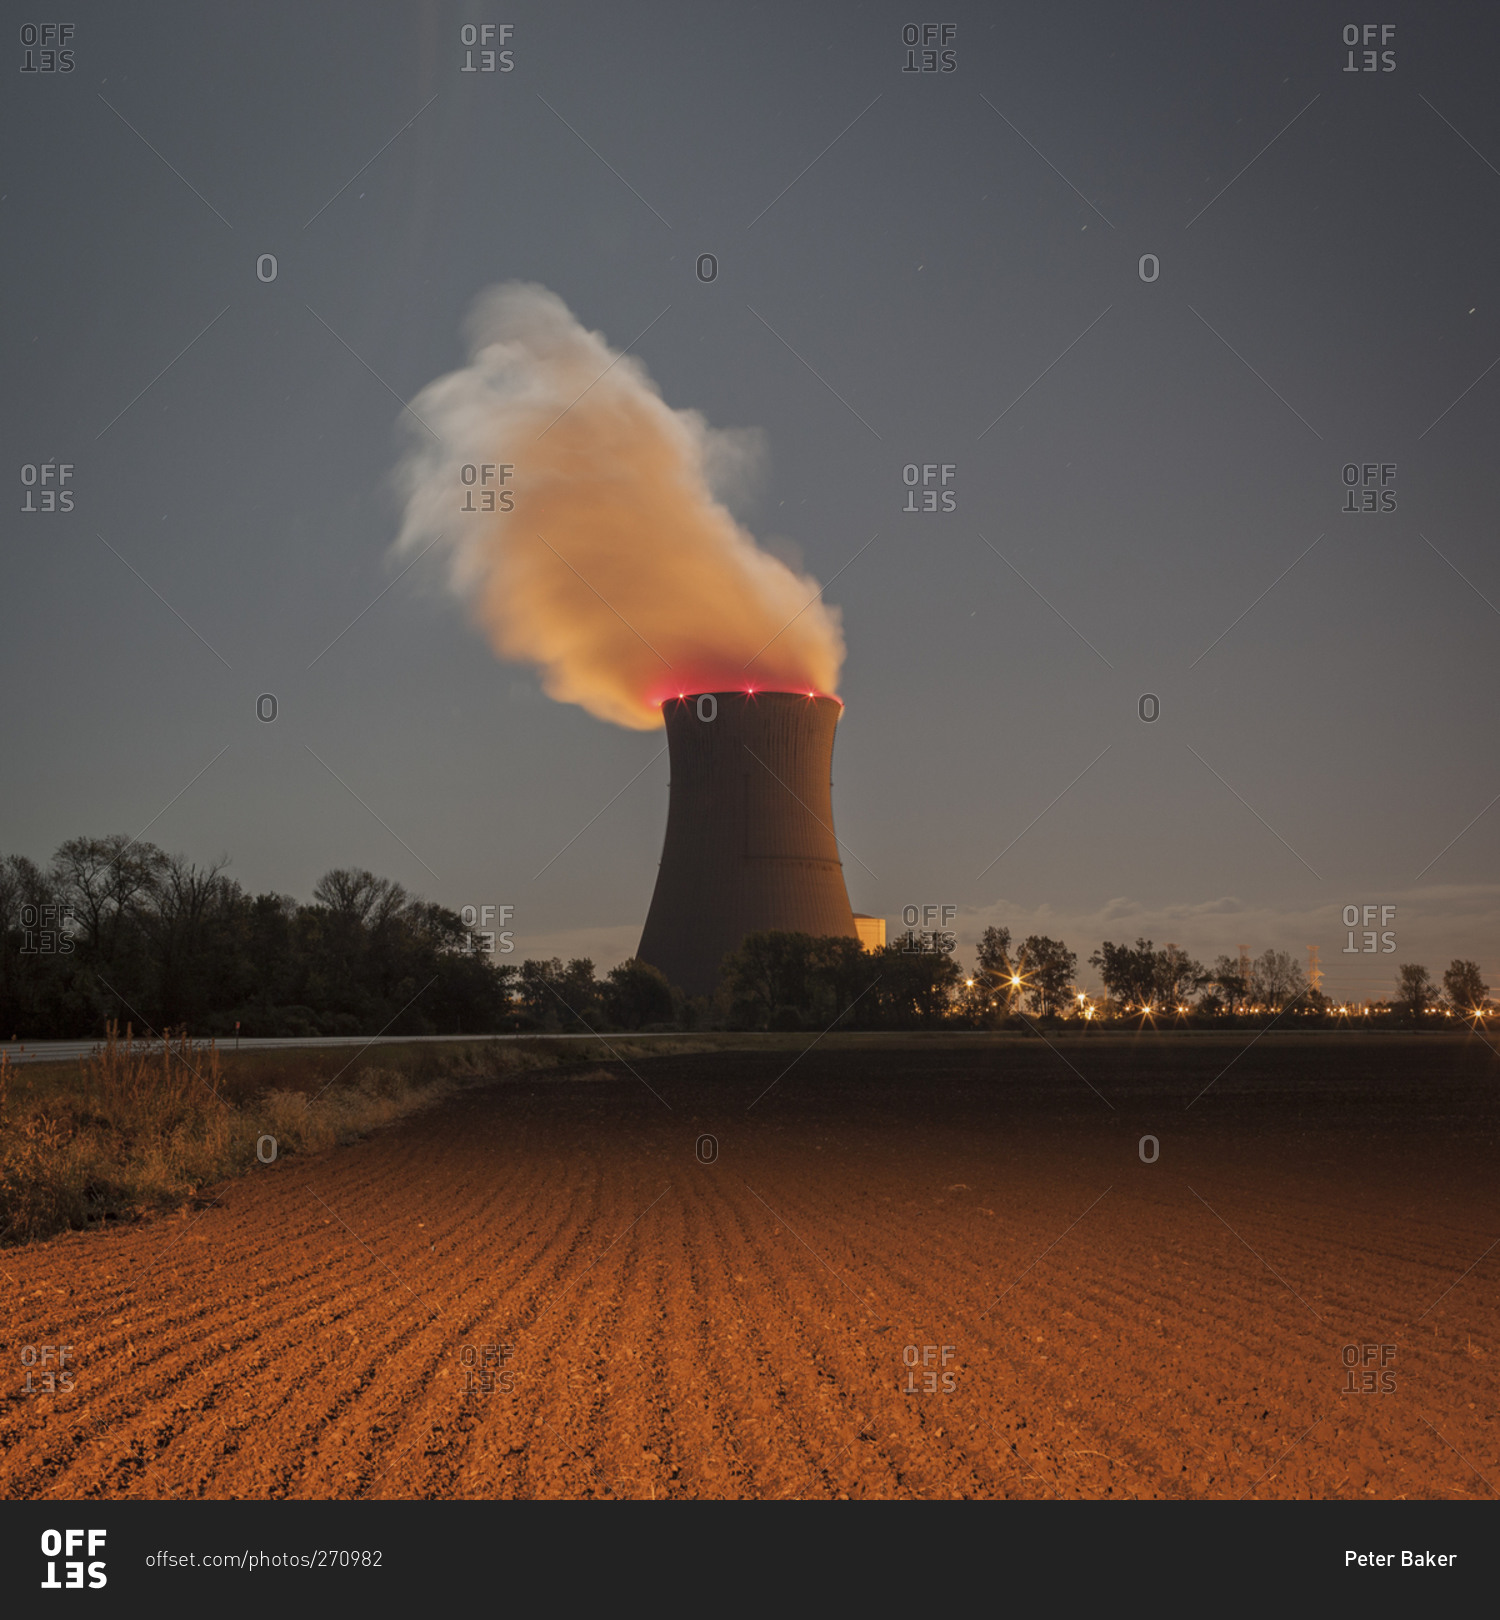 Cooling tower at a nuclear power plant next to a farm field at dusk